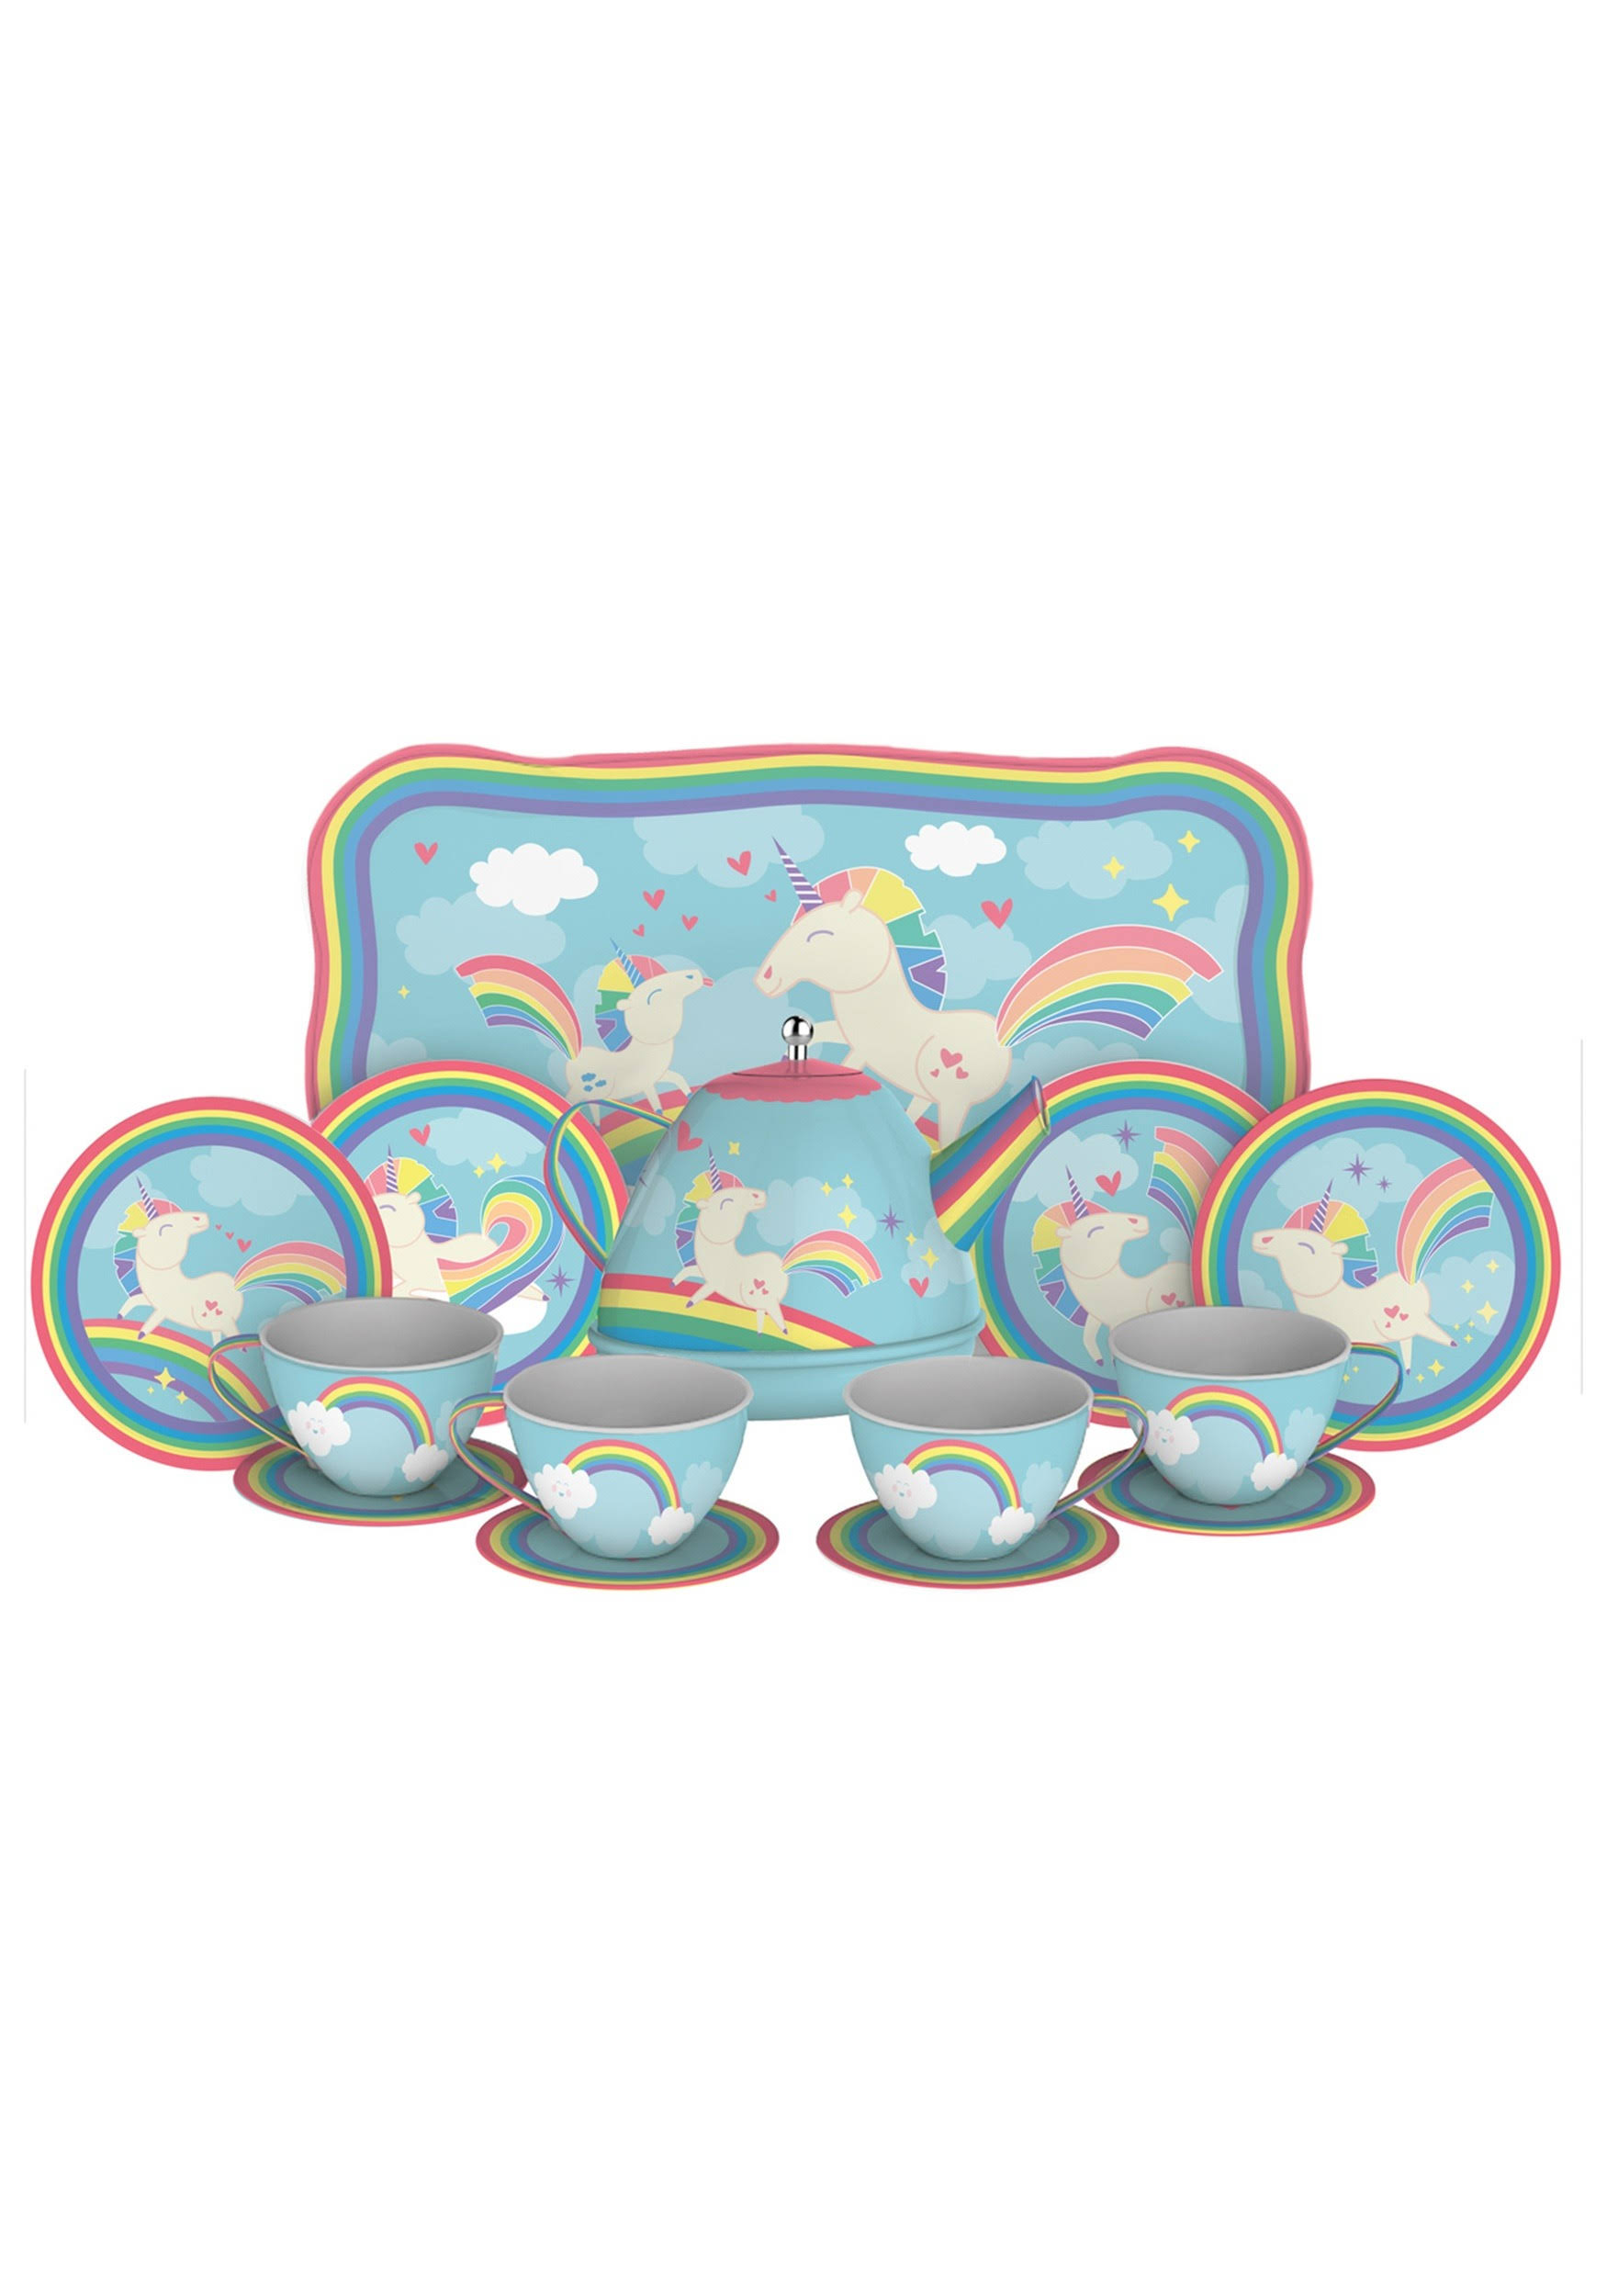 Schylling Unicorn Play Tea Toyset - Child Size Teacups, Saucers, and Serving Tray